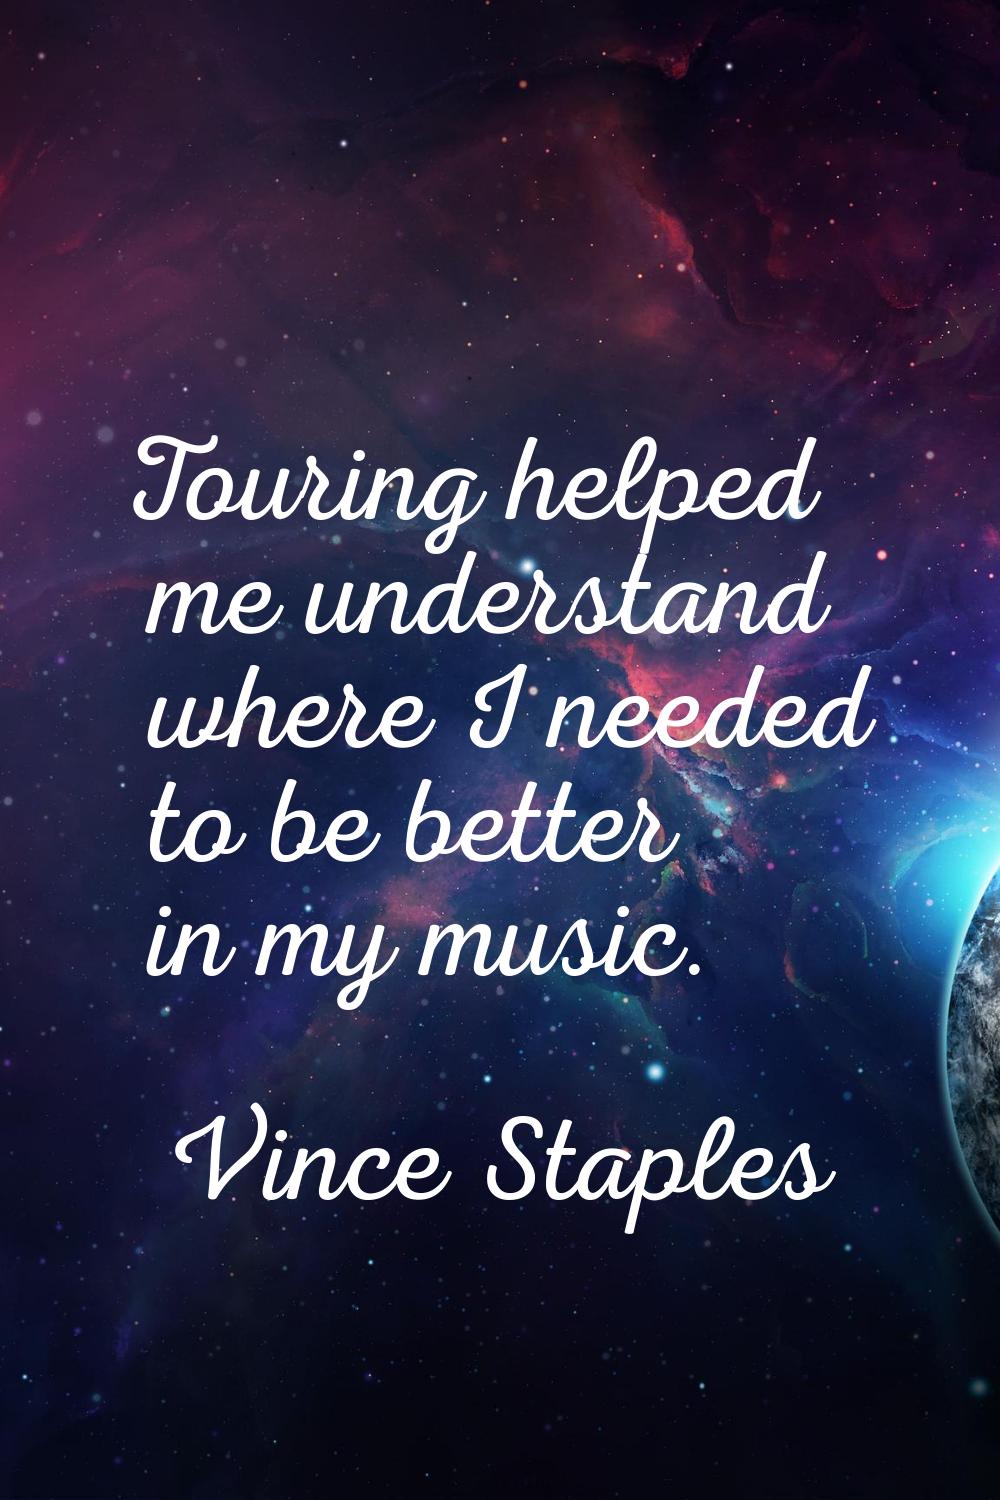 Touring helped me understand where I needed to be better in my music.